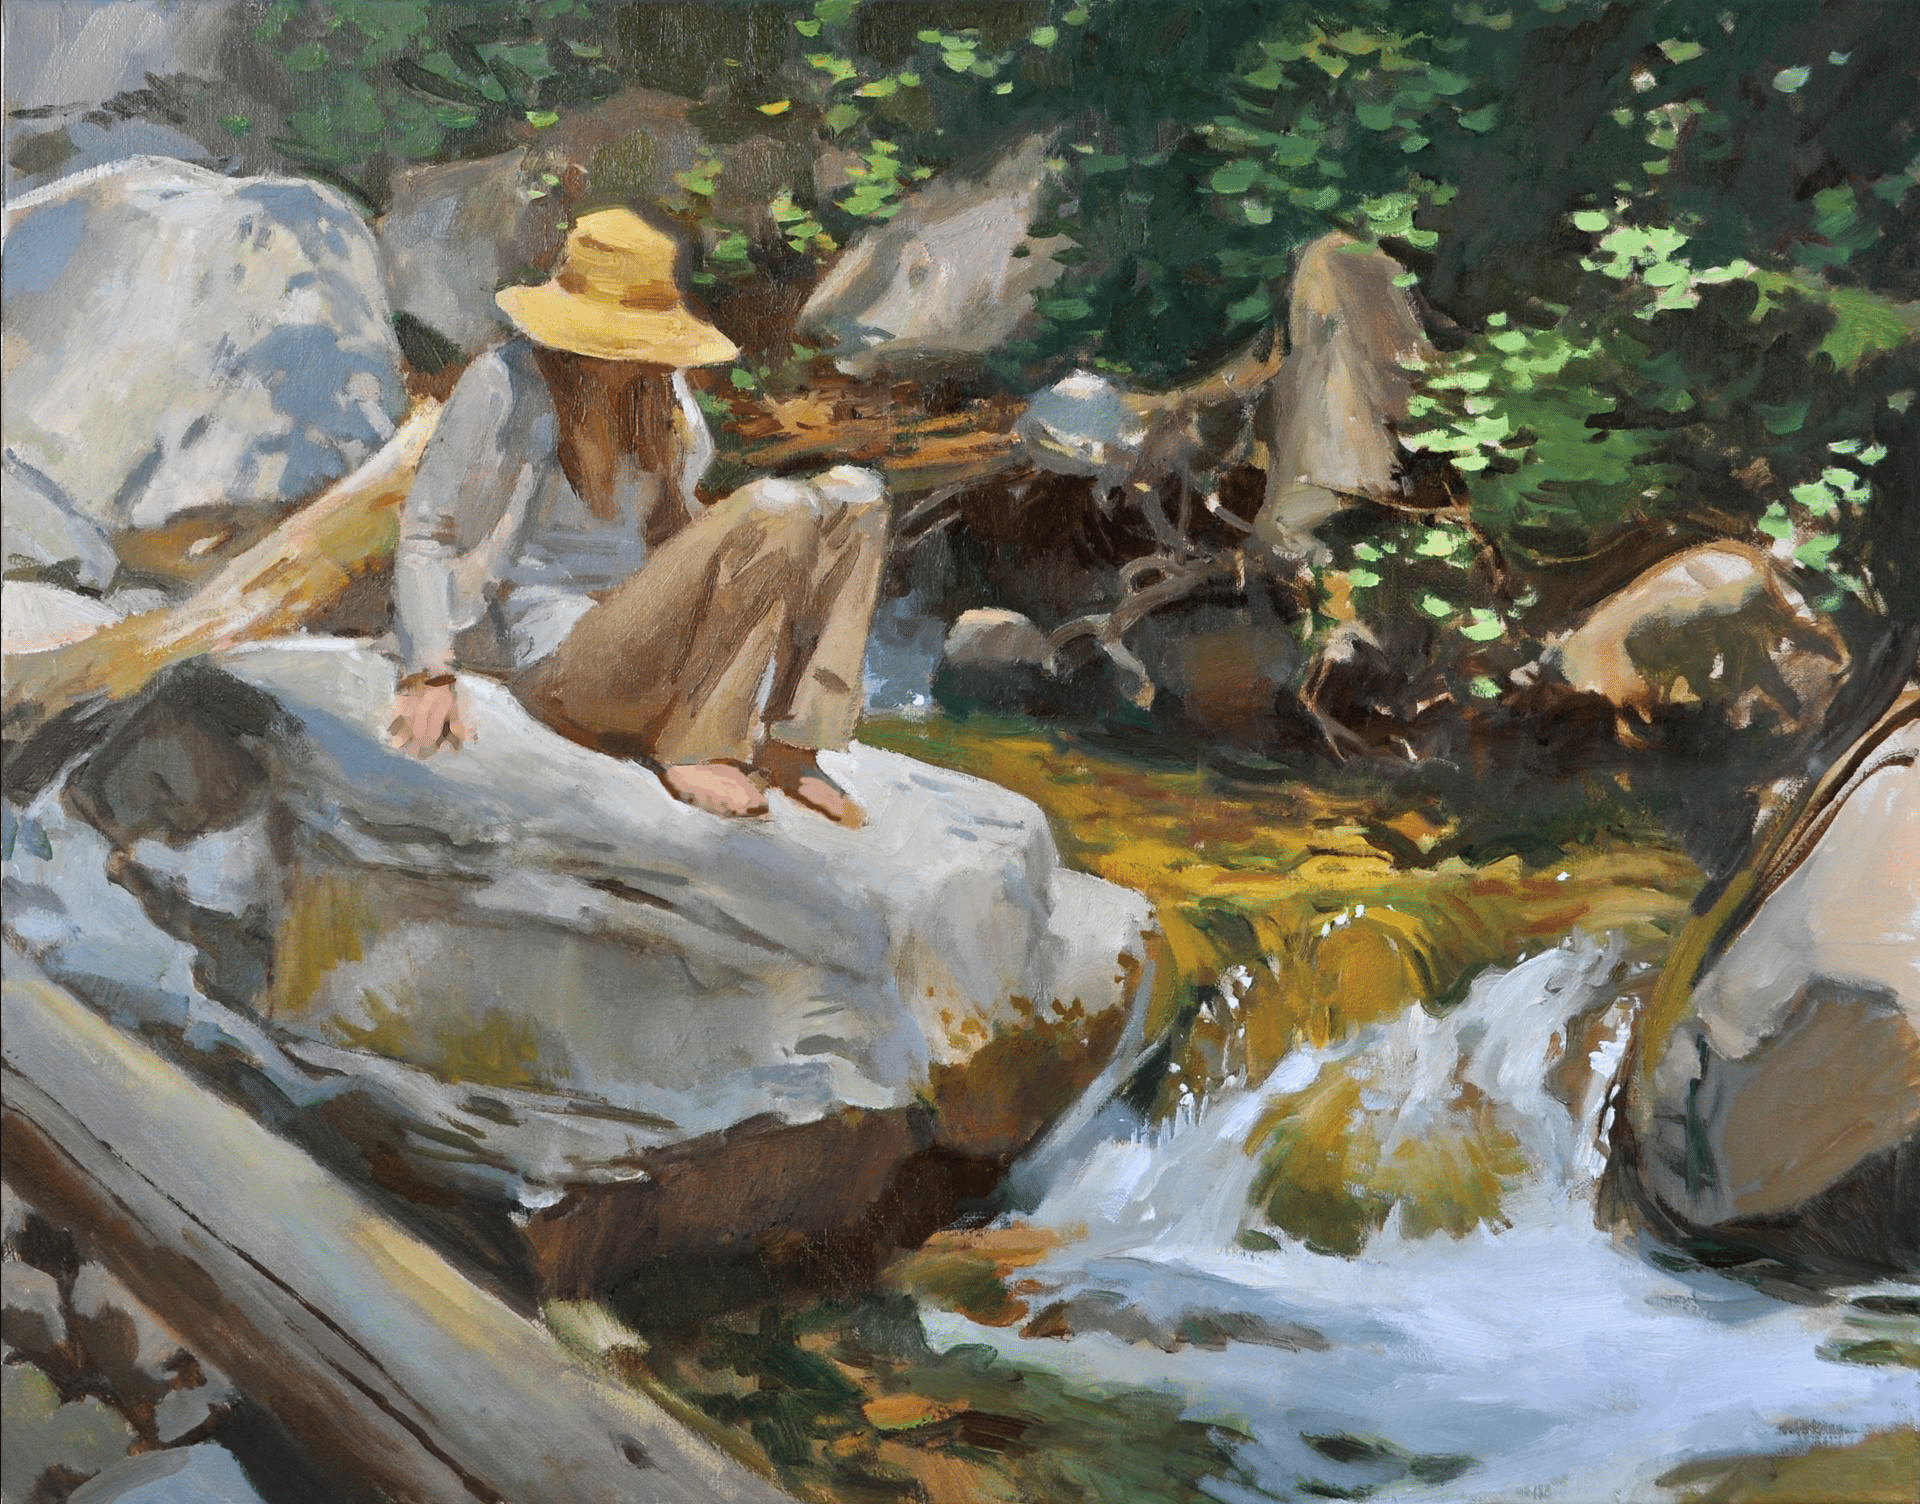 PleinAir Magazine's 1st Annual PleinAir Salon Art Competition Winner May/June 2011 First Place Overall Ray Roberts